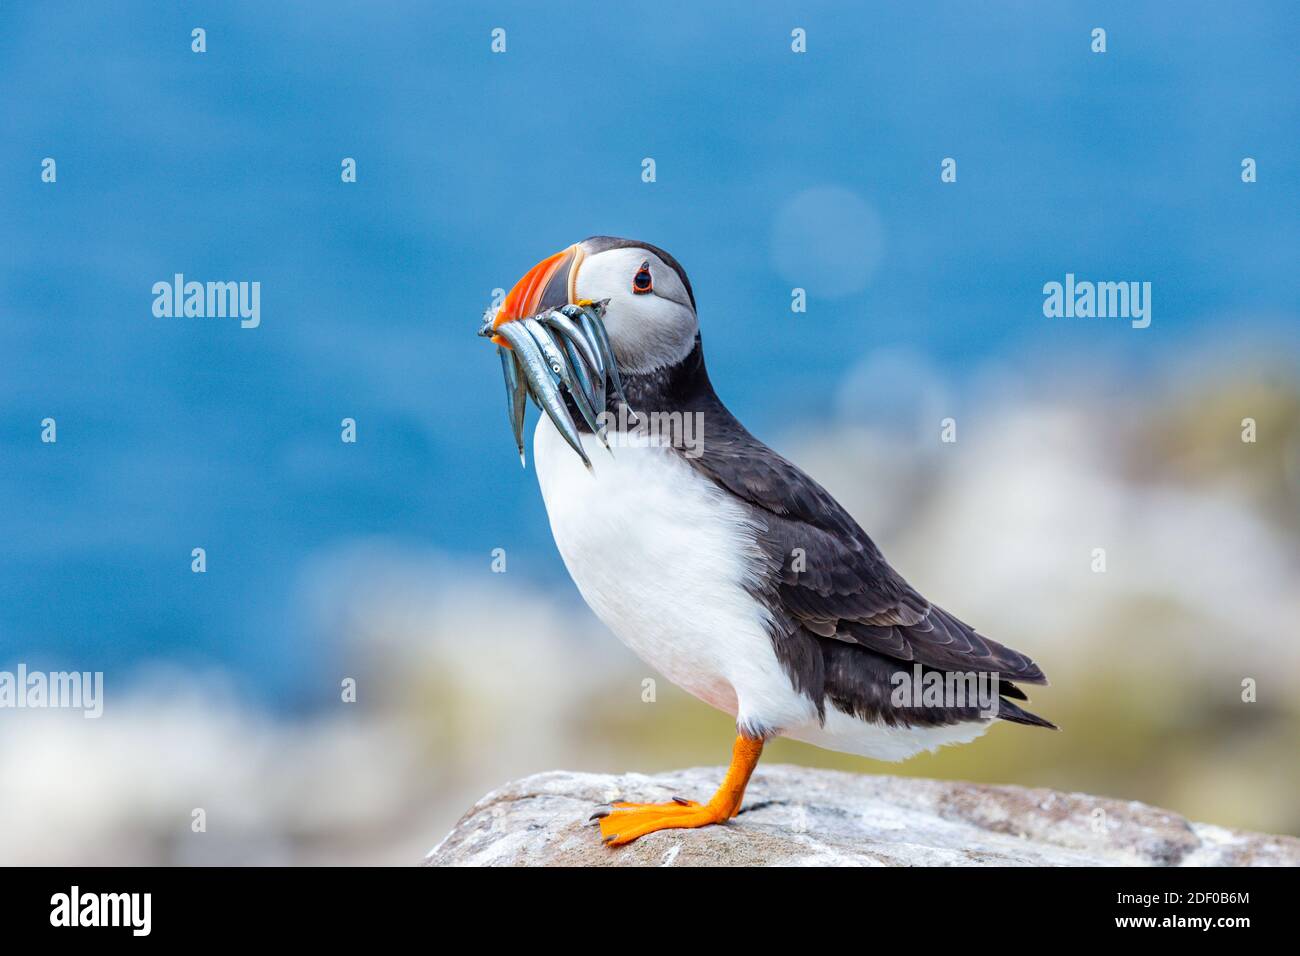 Puffin, atlantic puffin, Scientific name: Fratercula arctica with a beak full of sand eels.  Perched on a lichen covered rock. Blue sky background. Fa Stock Photo